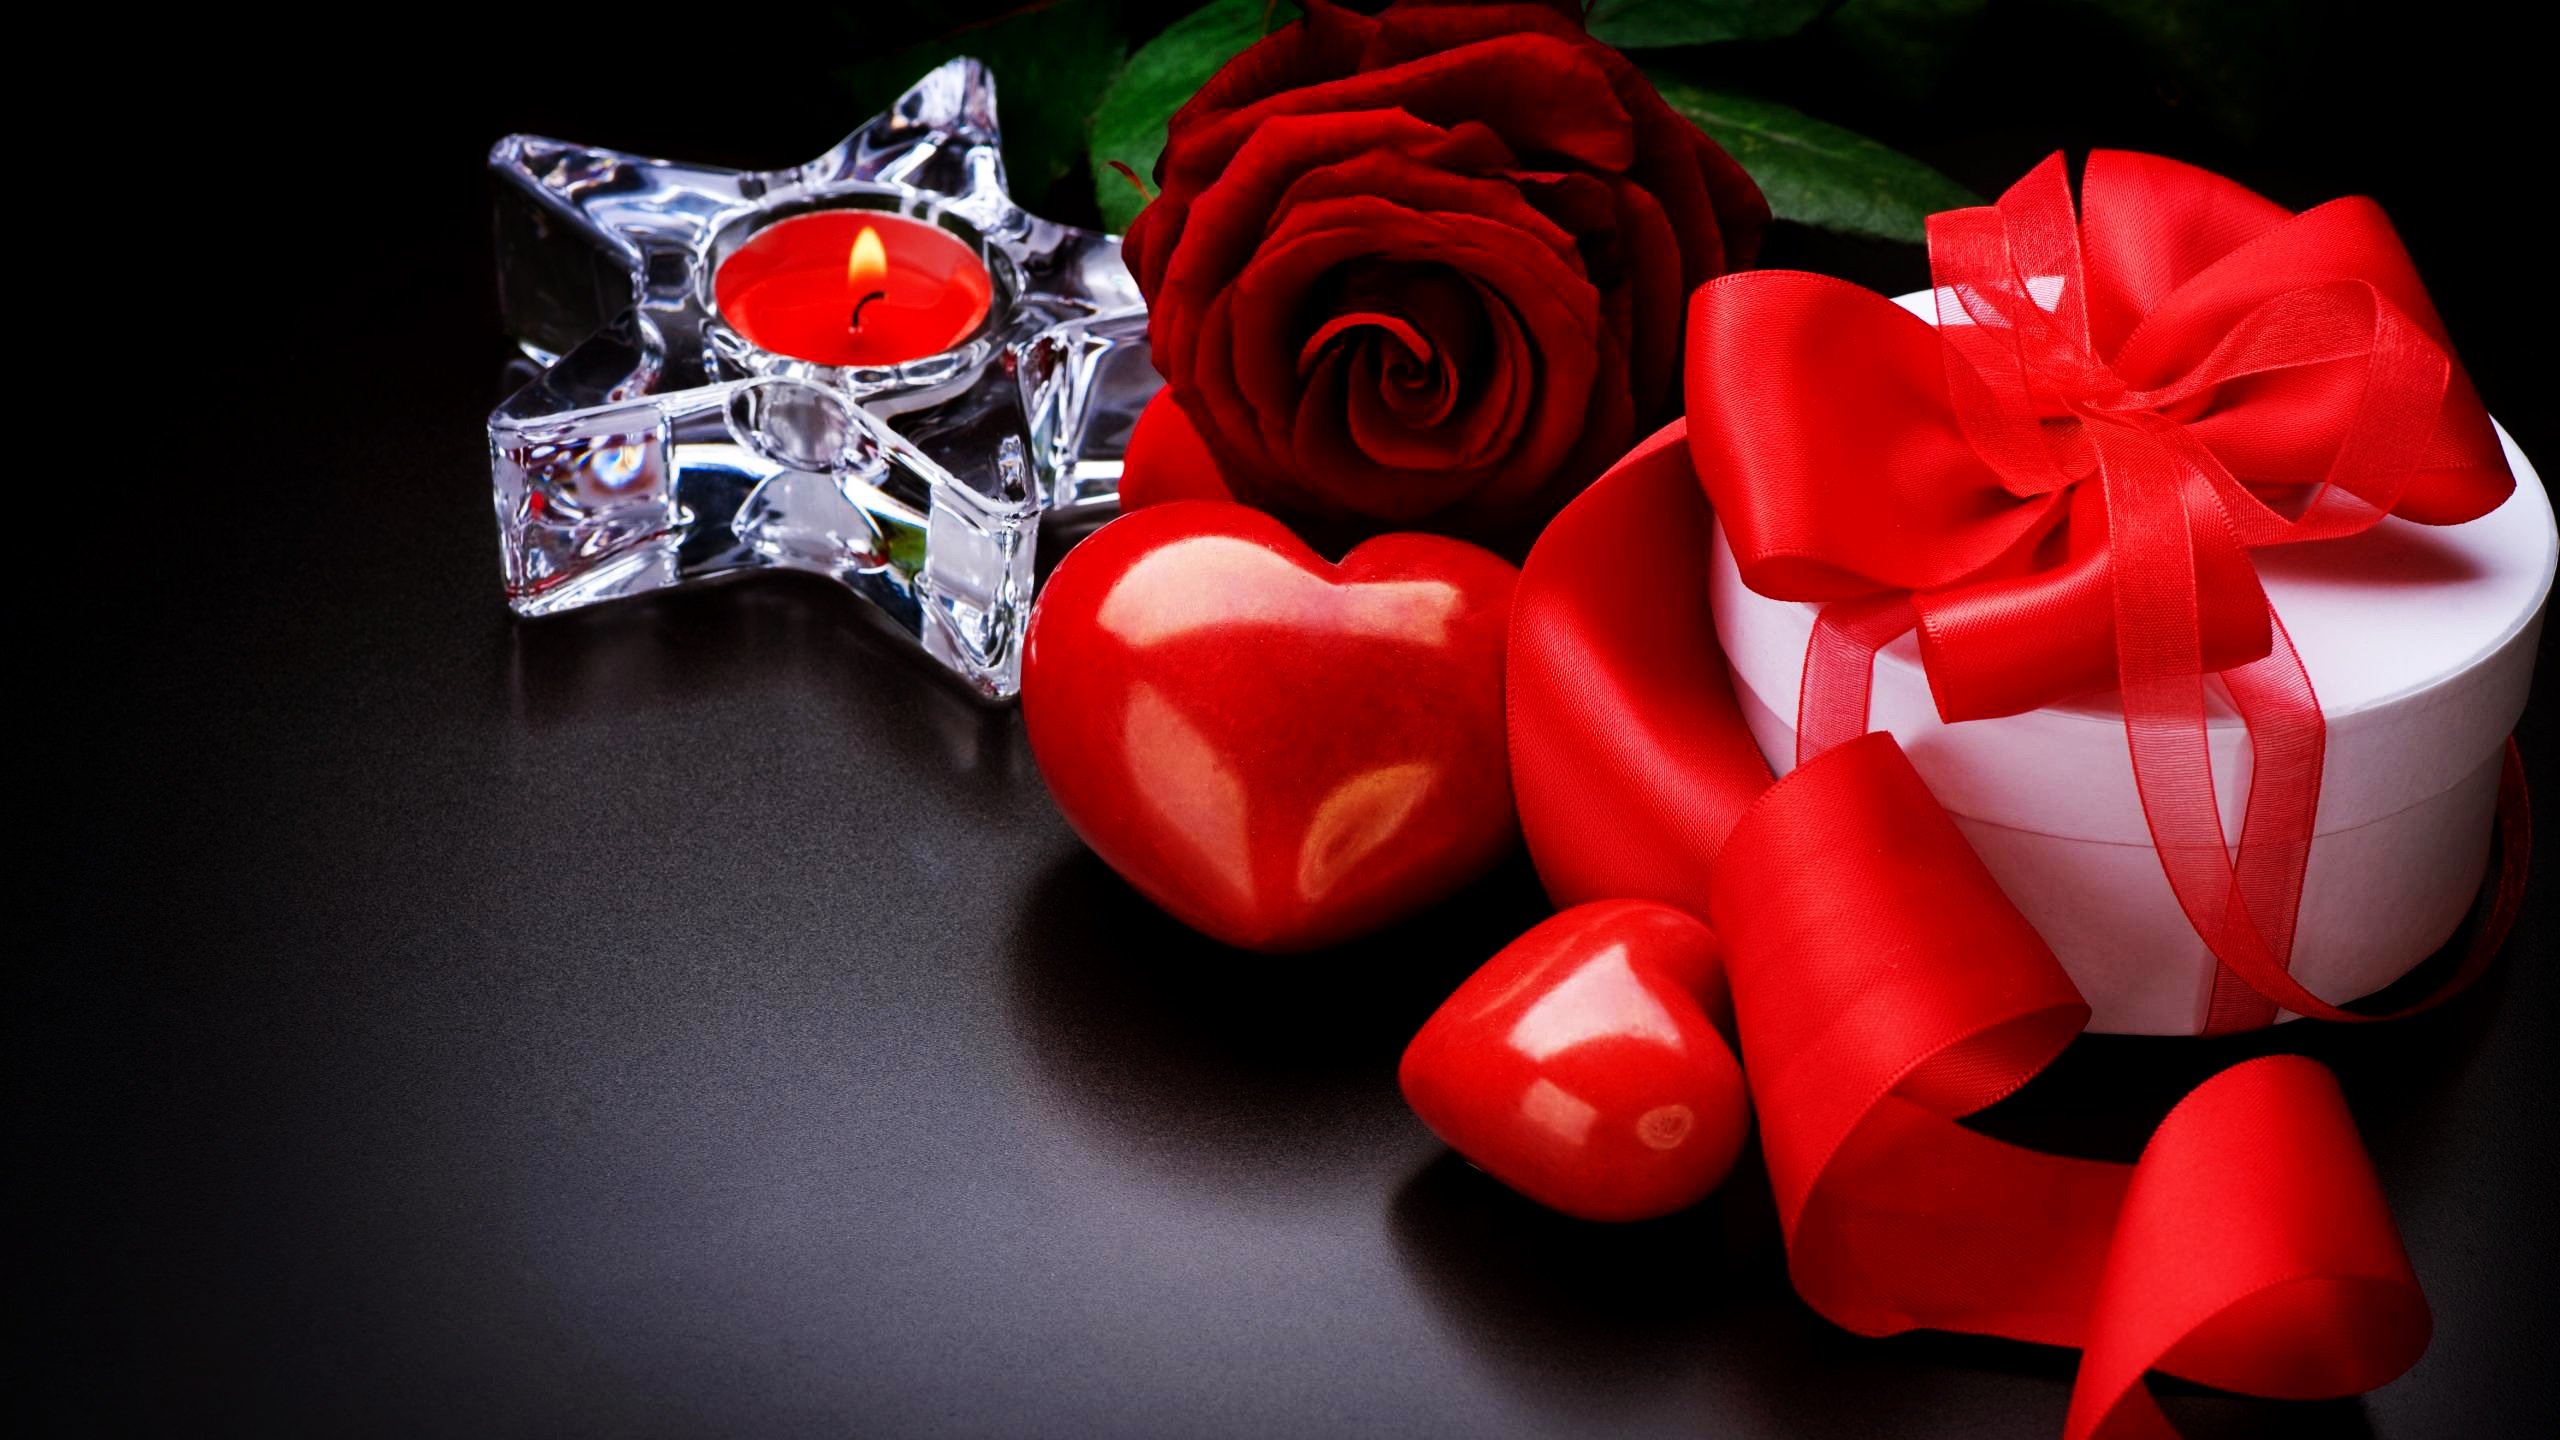 Awesome Valentine's Day free wallpaper ID:373247 for hd 2560x1440 desktop